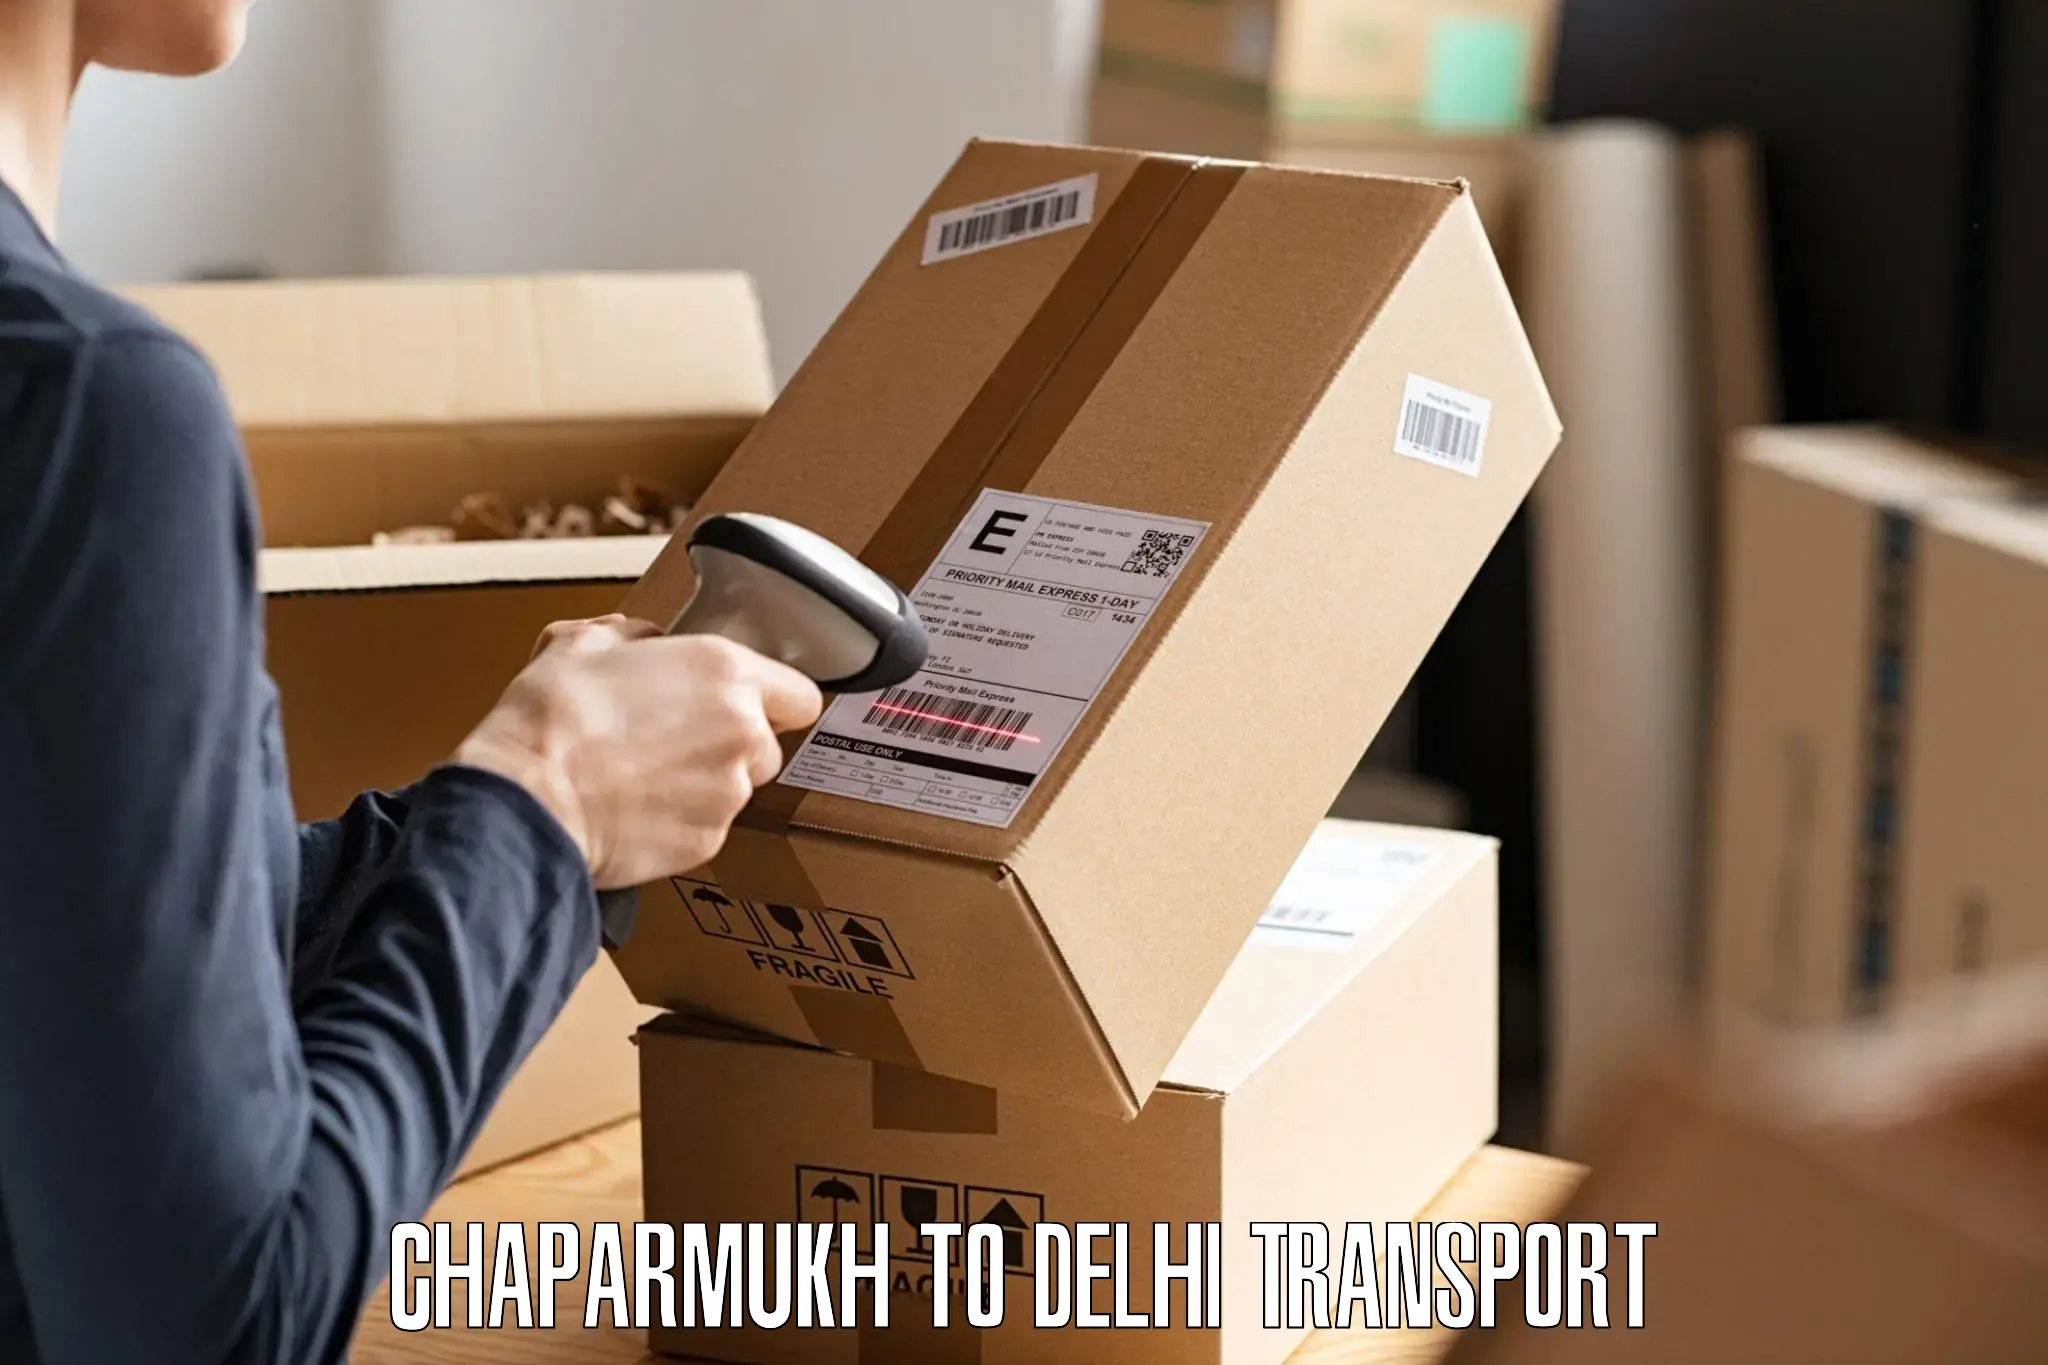 International cargo transportation services Chaparmukh to NCR